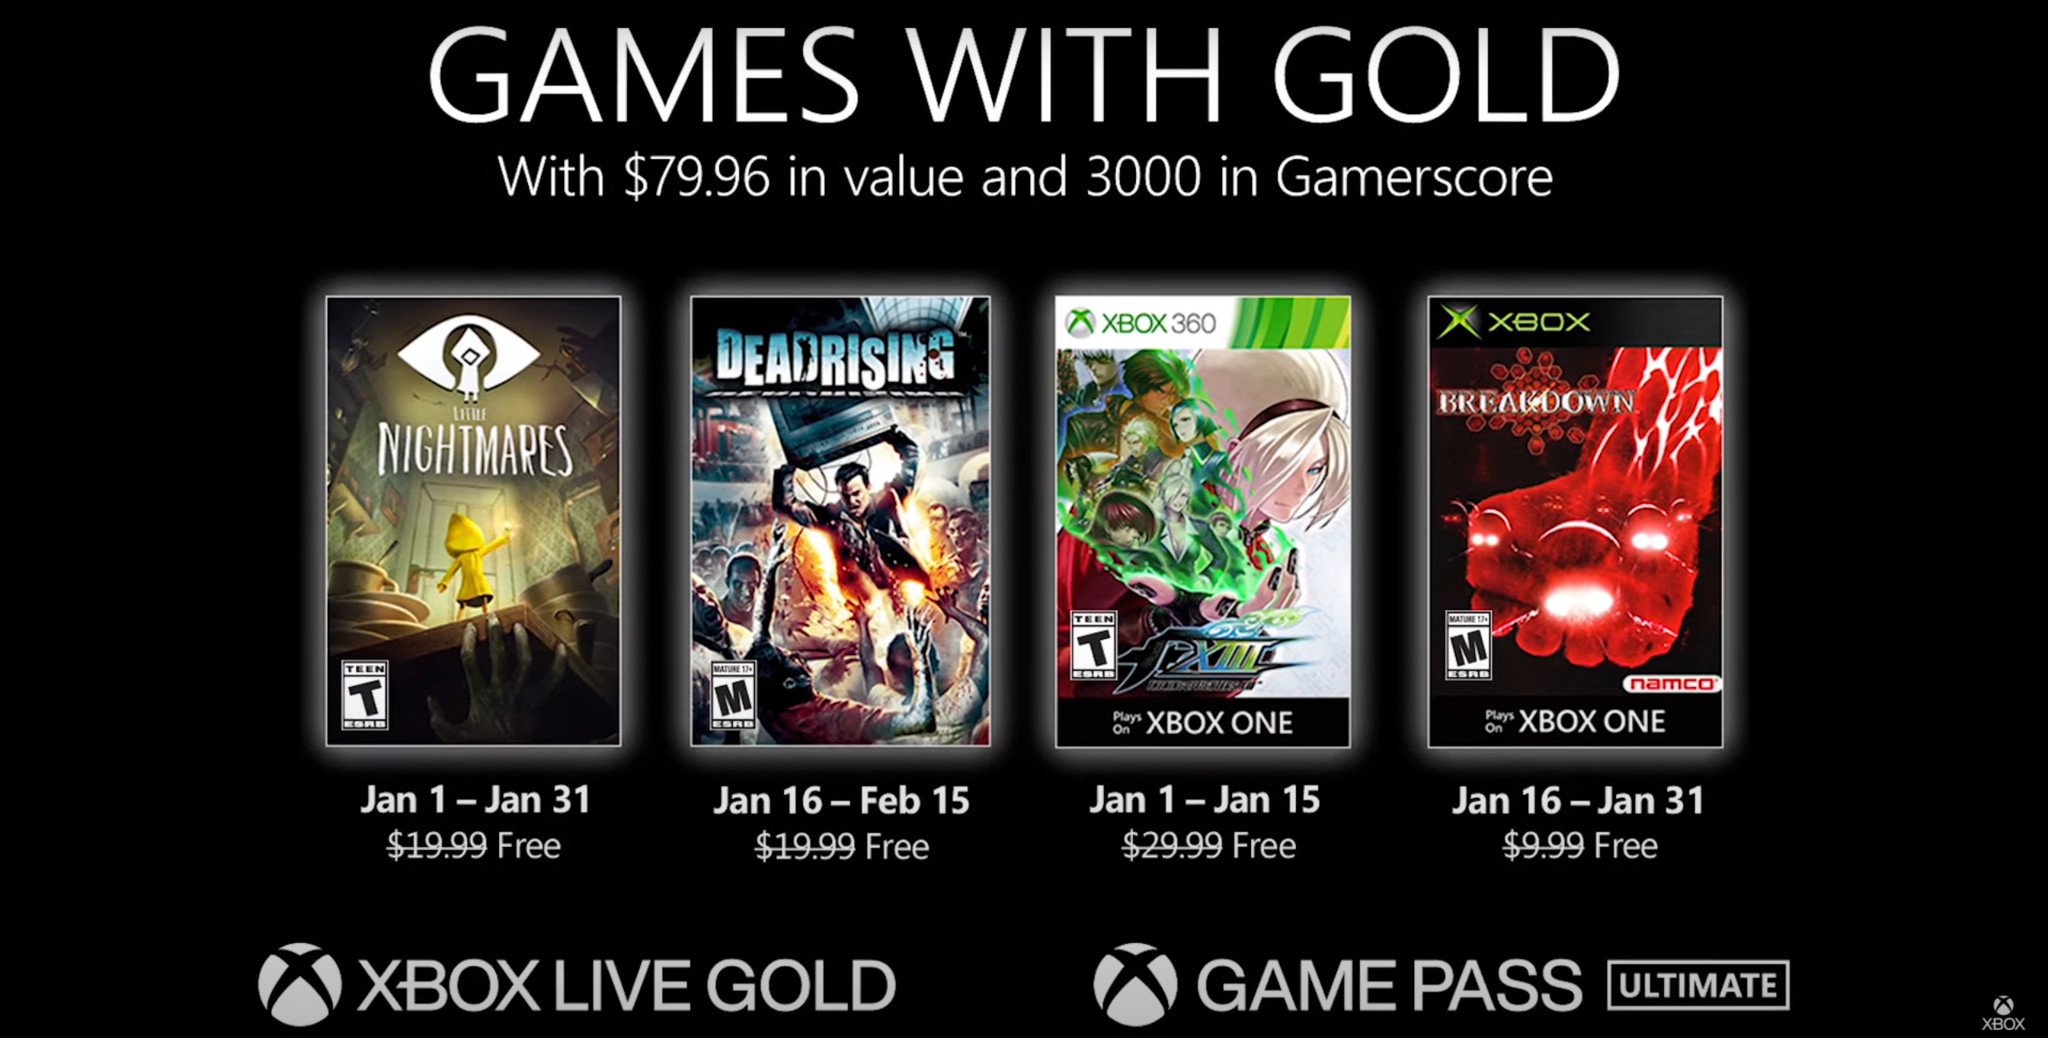 xbox-games-with-gold-january-2020-01.jpg